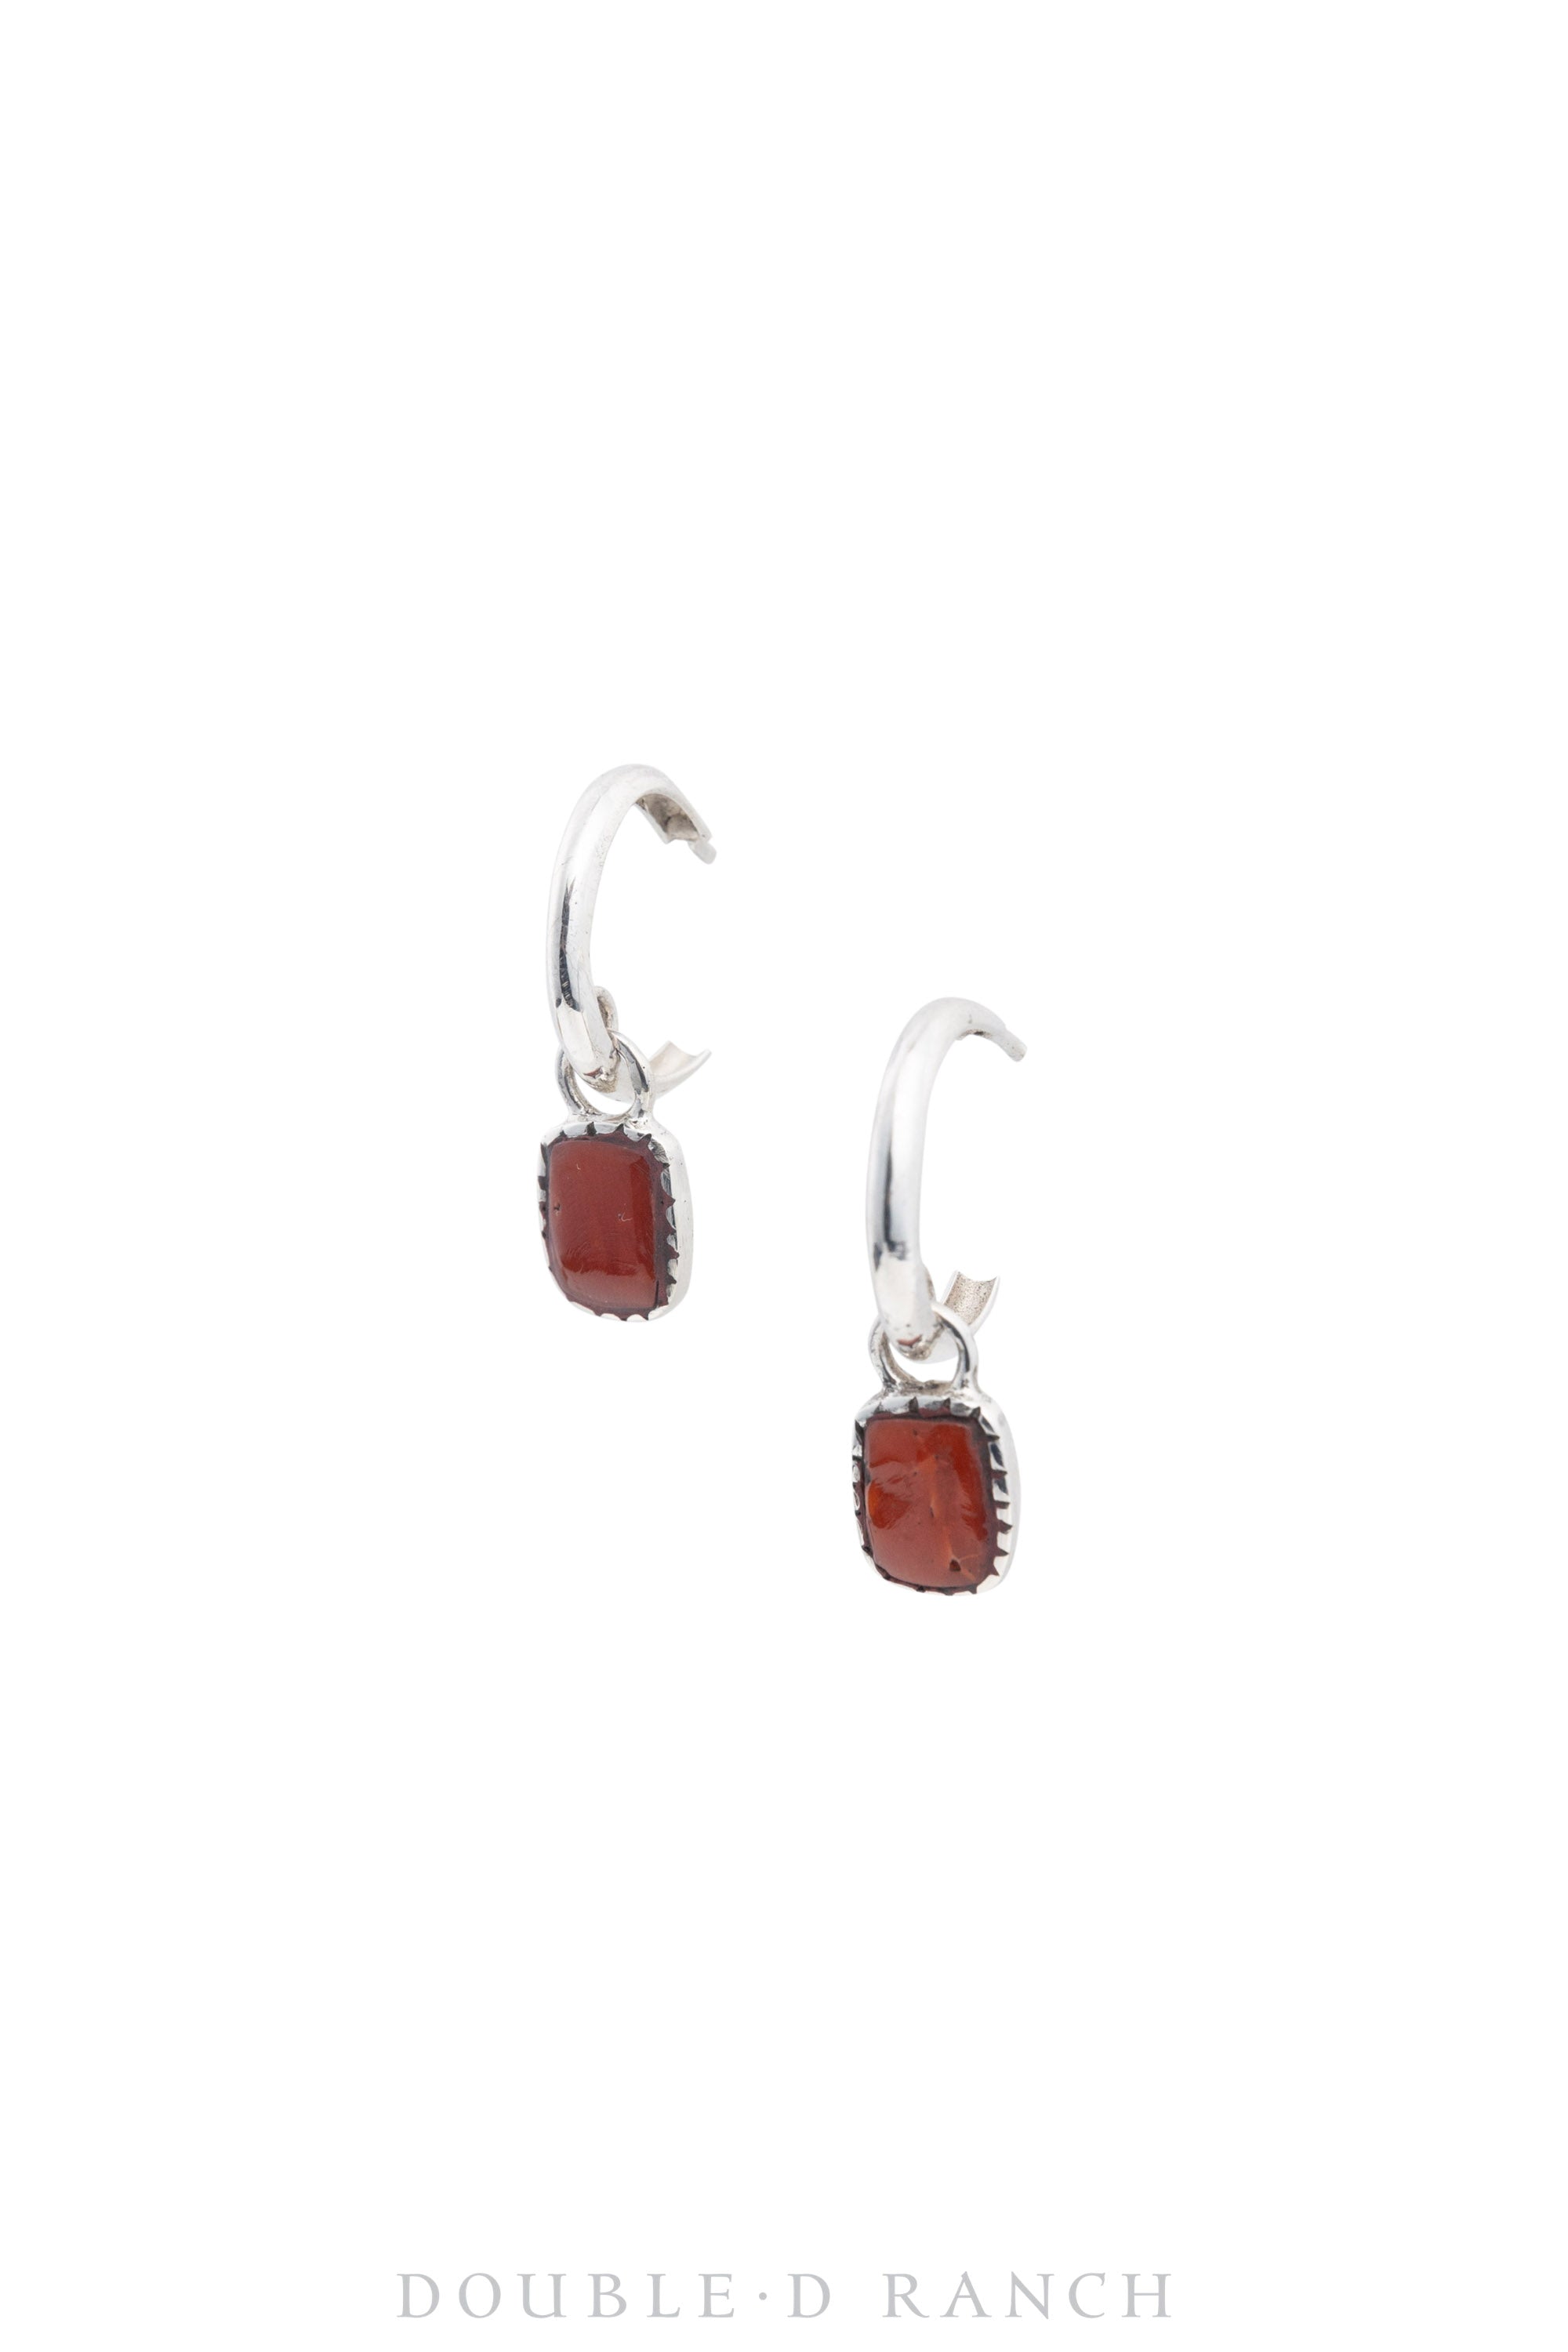 Earrings, Hoops, Coral, Contemporary, 1521